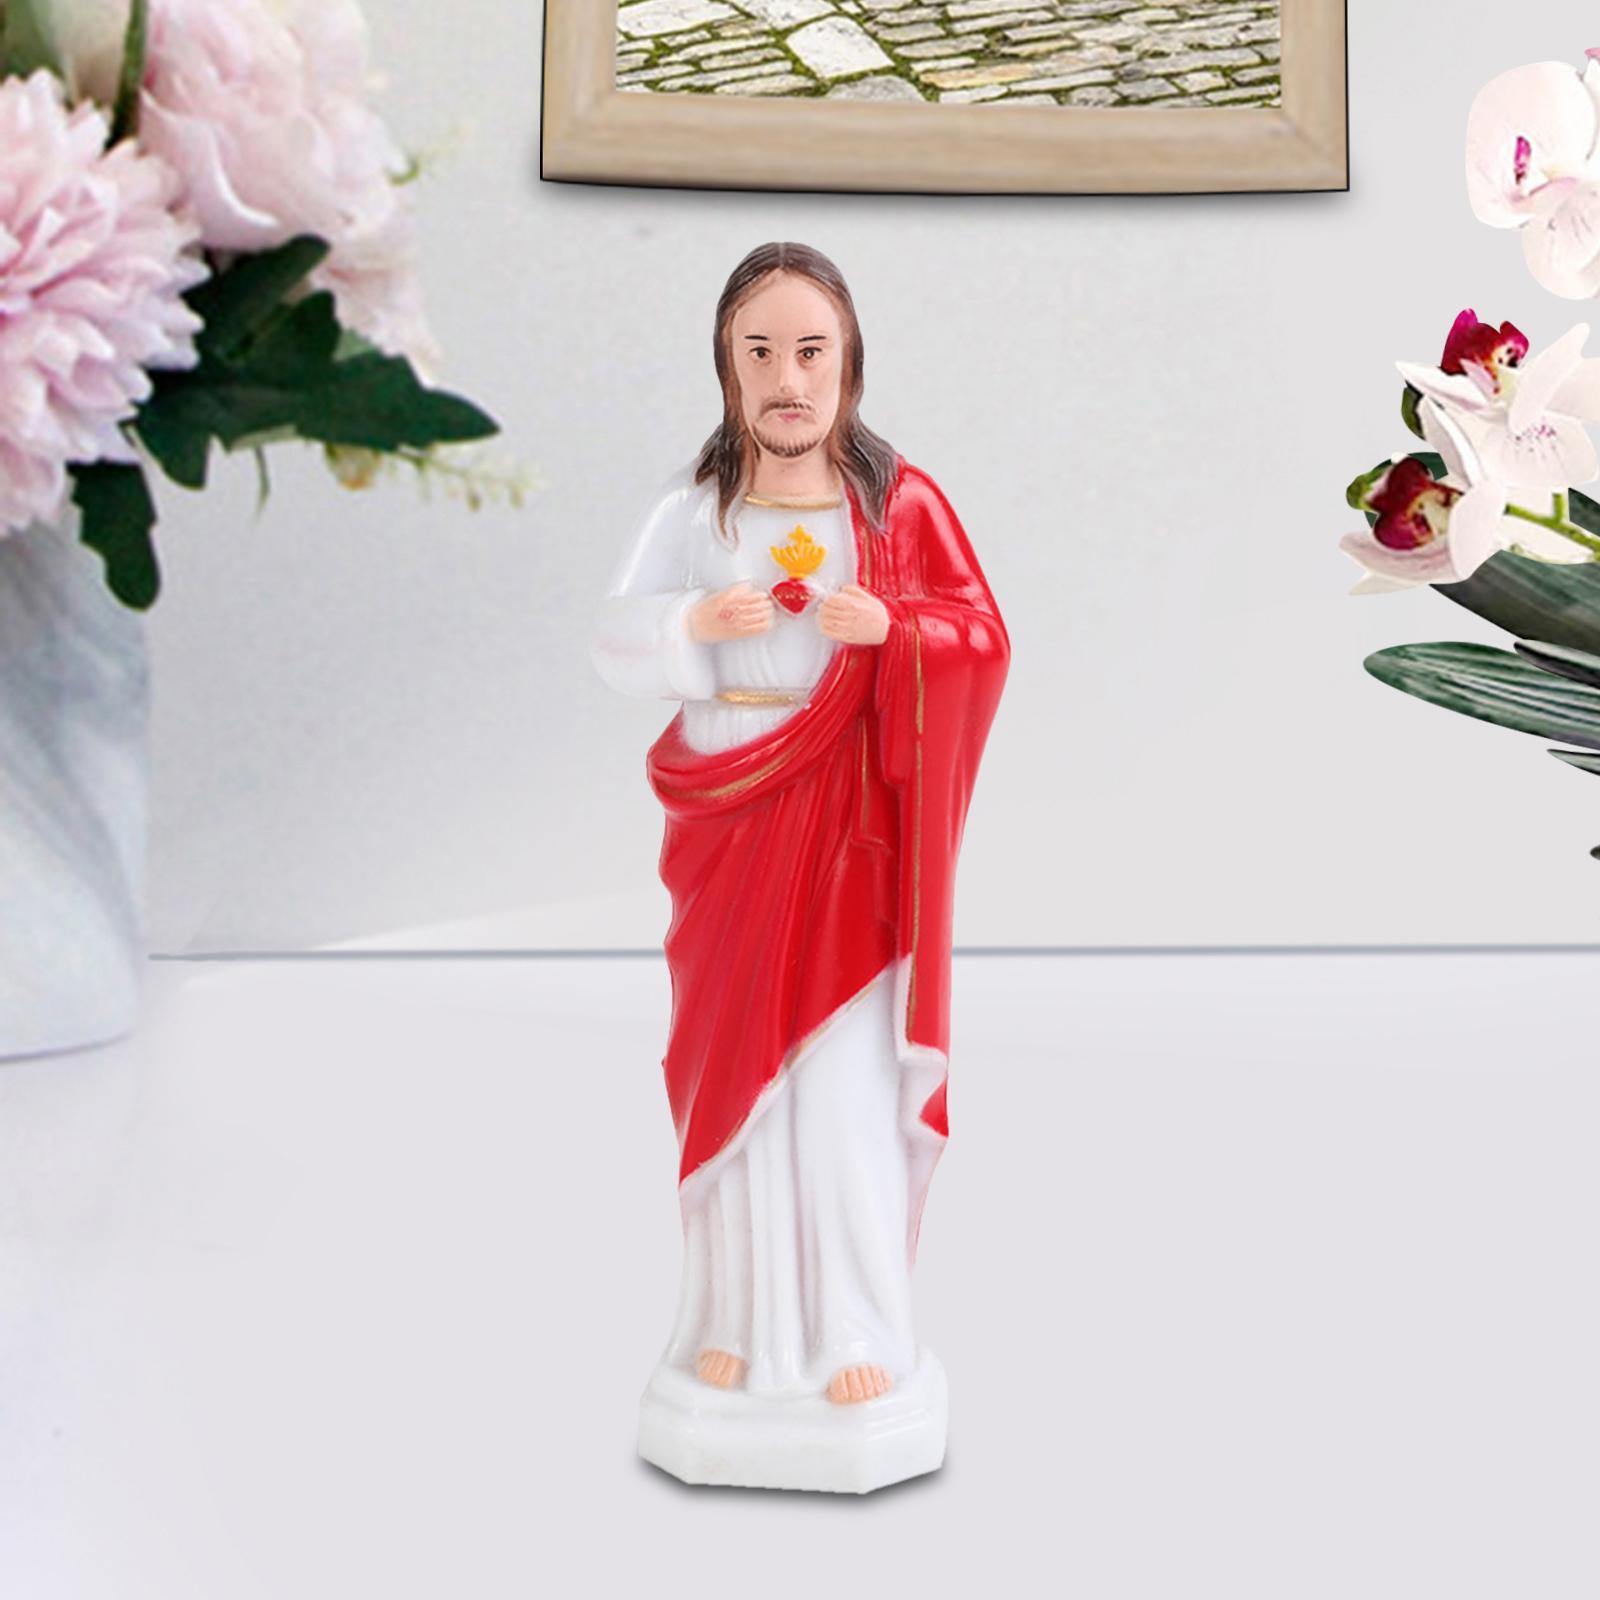 Priest Statue Religious Sculpture Christian Holy Decor for Tabletop  Red